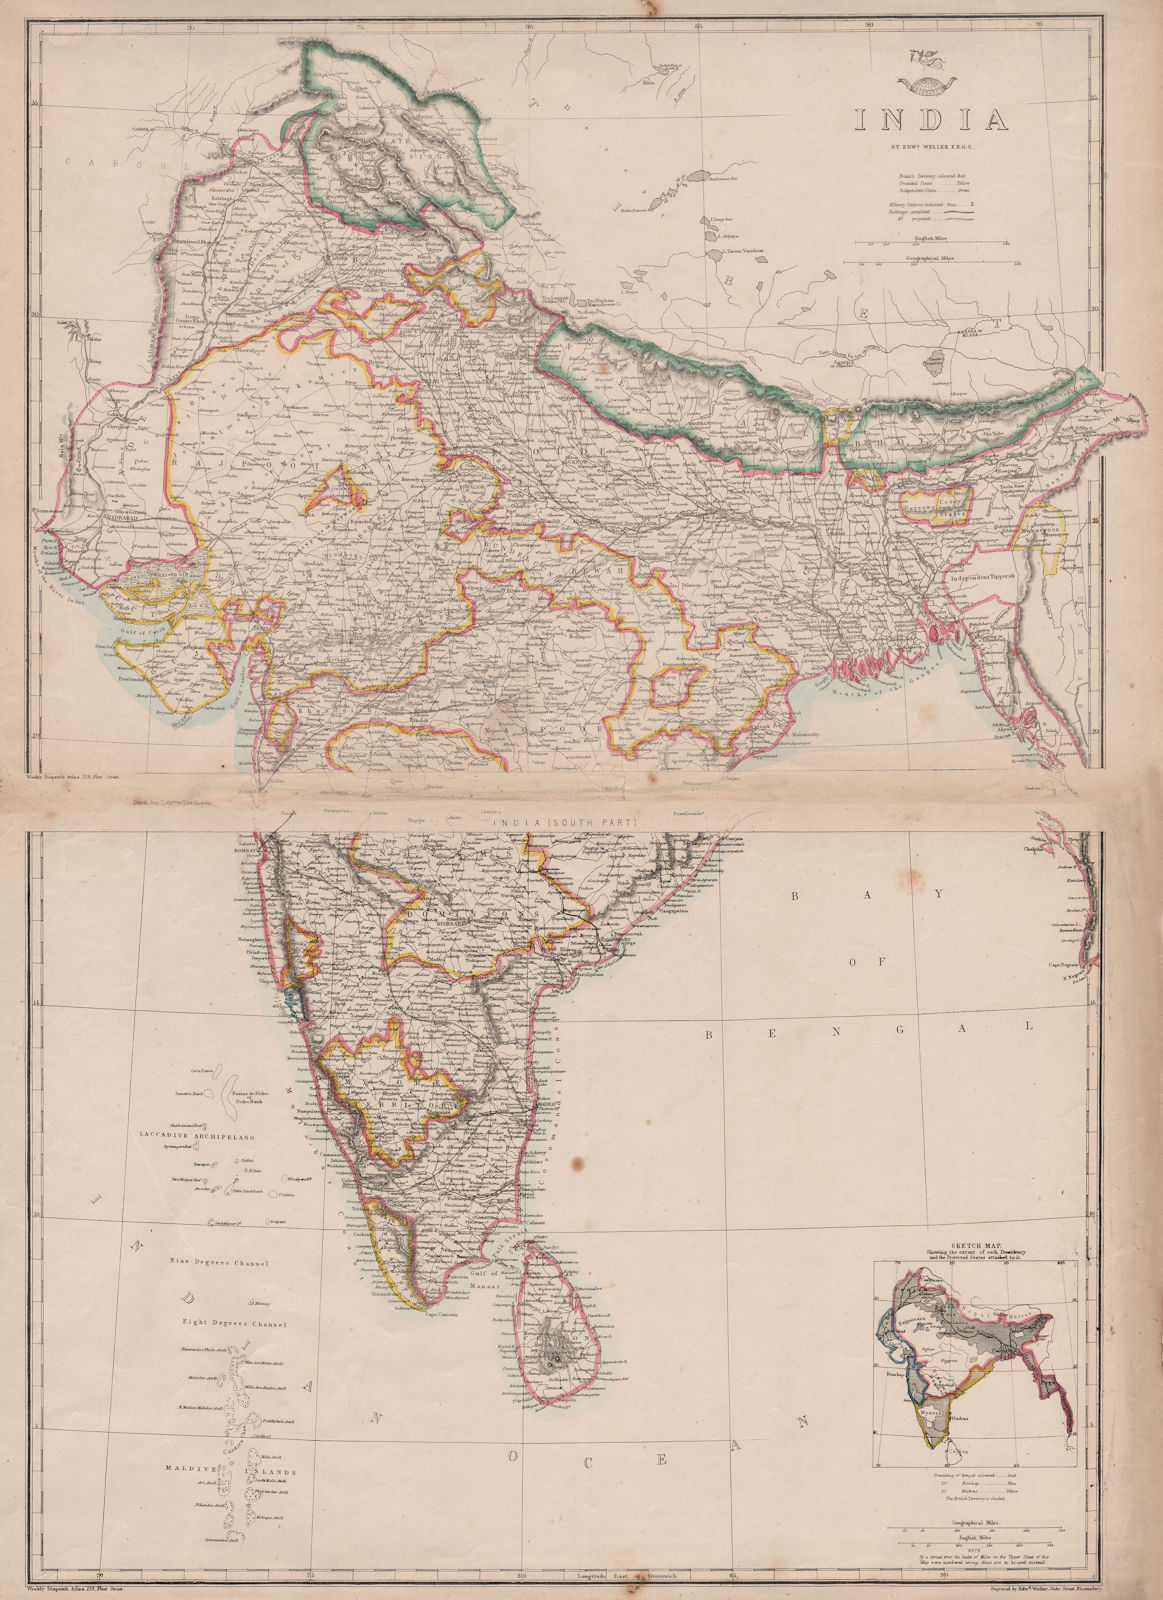 INDIA British/protected/ind states.Completed & planned railways.WELLER 1862 map